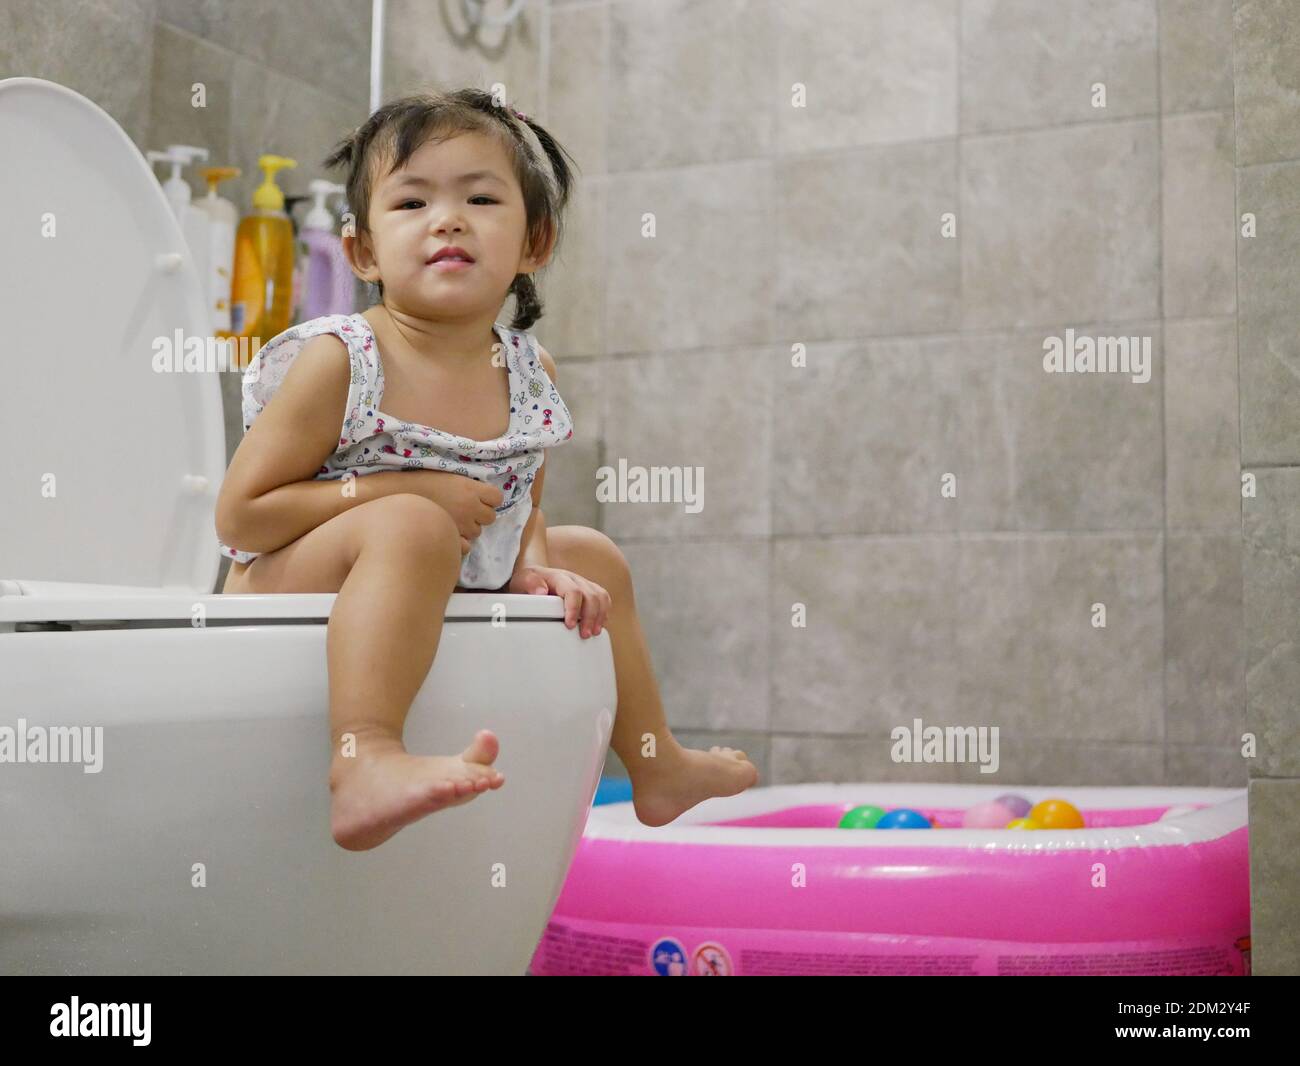 Portrait Of Cute Girl Using Toilet Bowl At Home Stock Photo - Alamy